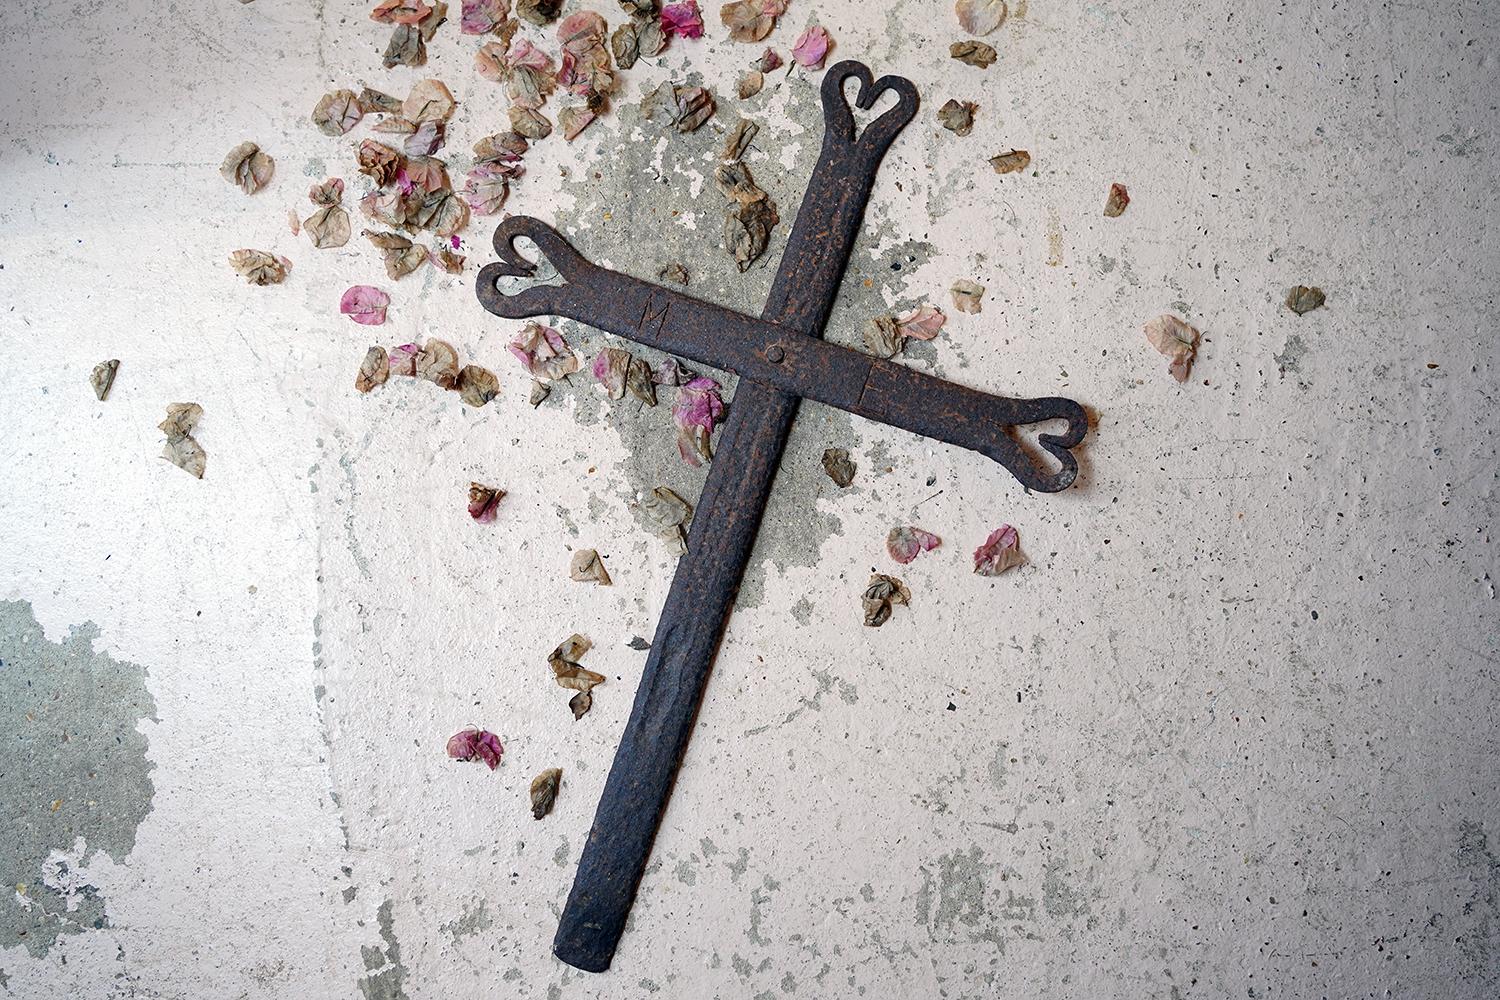 The blacksmith made nineteenth century Irish wrought iron cross, forged in two sections, having openwork heart motif ends and the initials M and E to the arms, the whole having been discovered in a barn in County Cavan, Ireland.

The cross is in